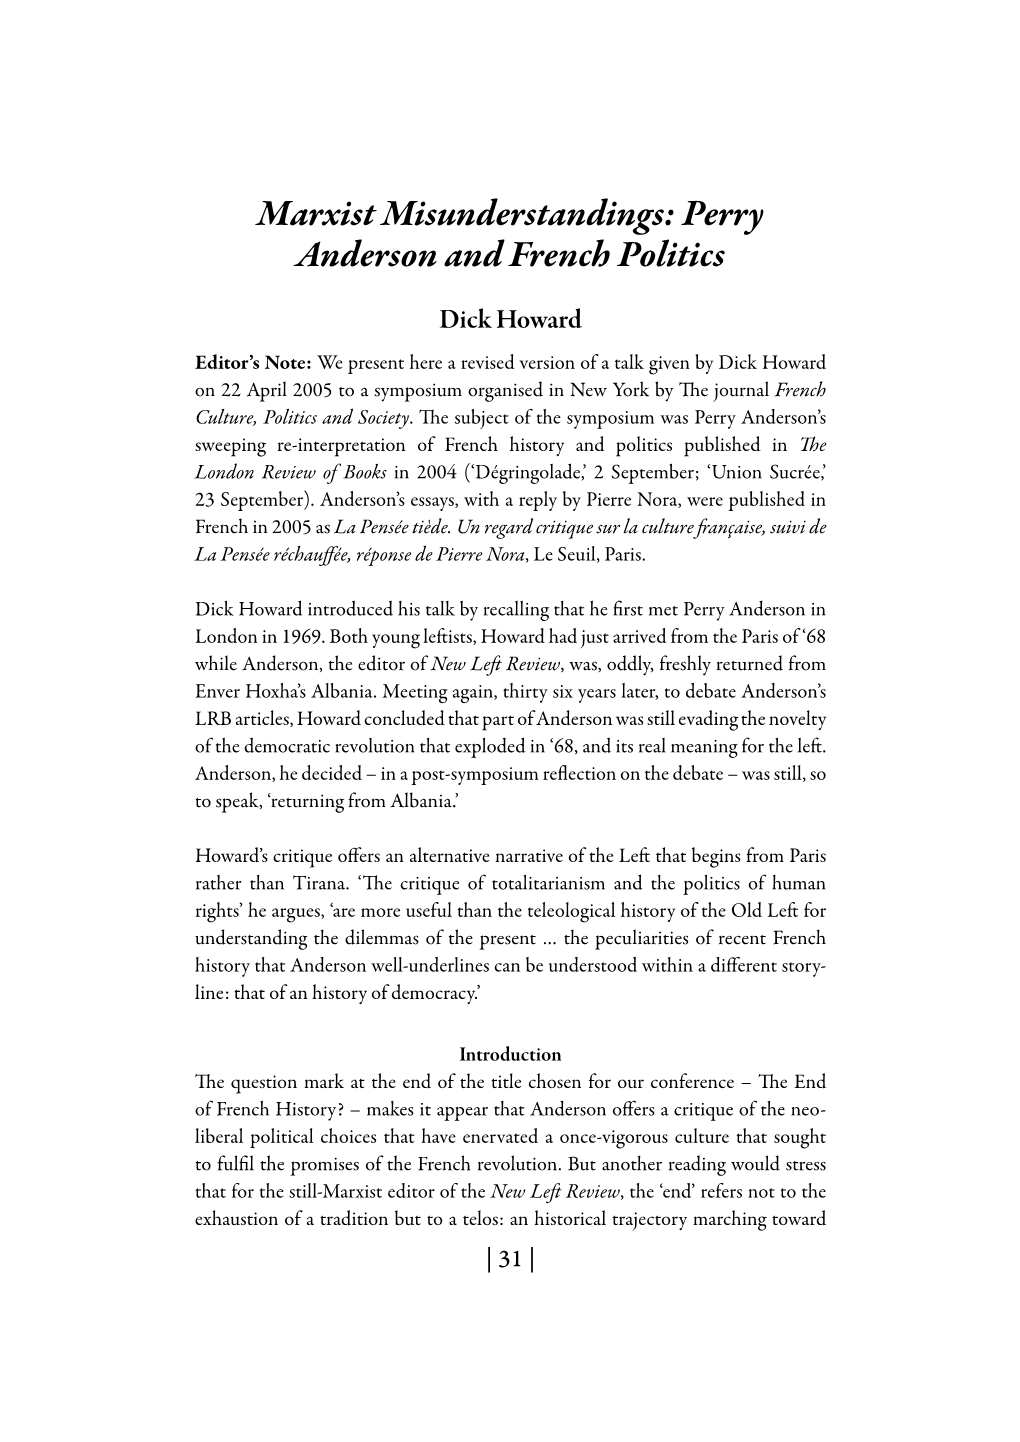 Perry Anderson and French Politics